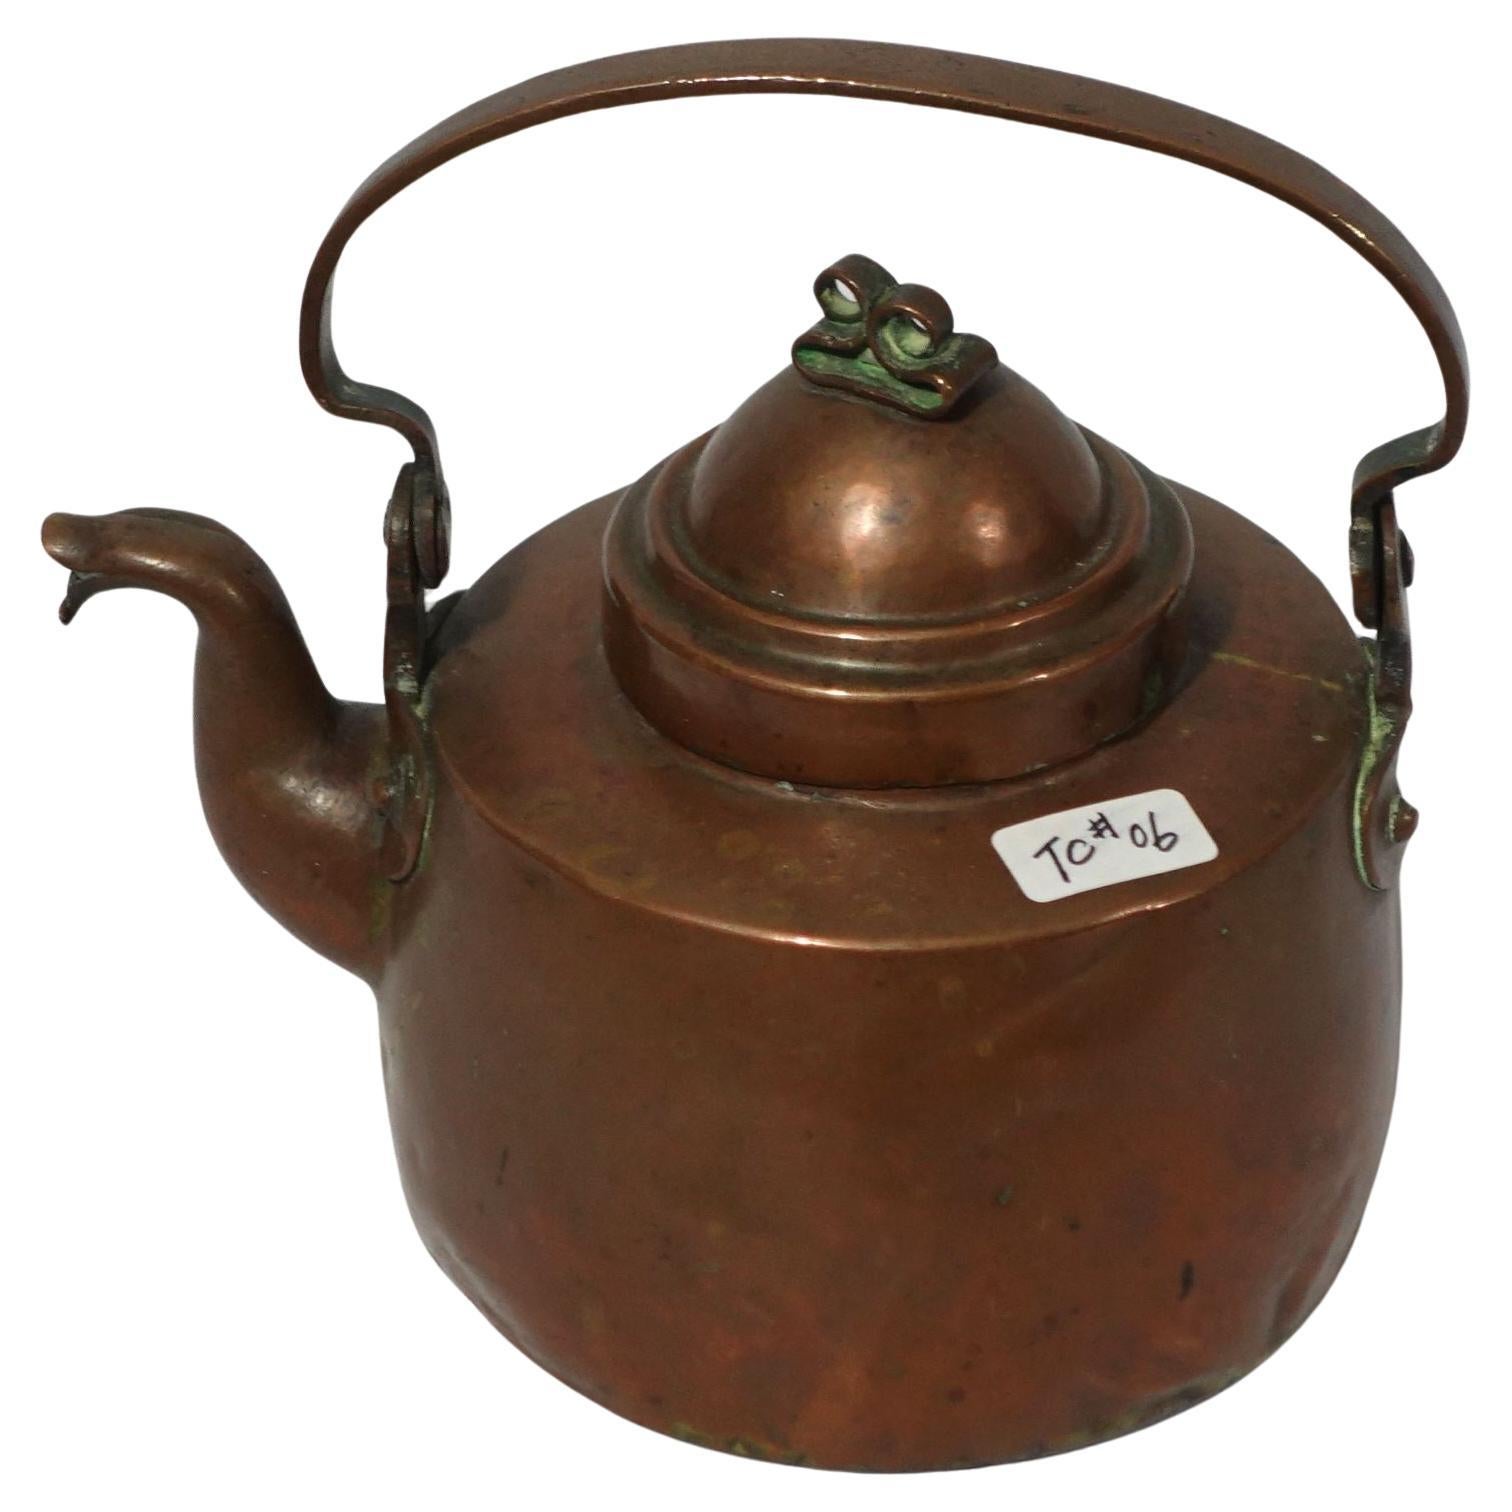 Antique 1840 A Small French Copper Tea Kettle, TC#06 For Sale